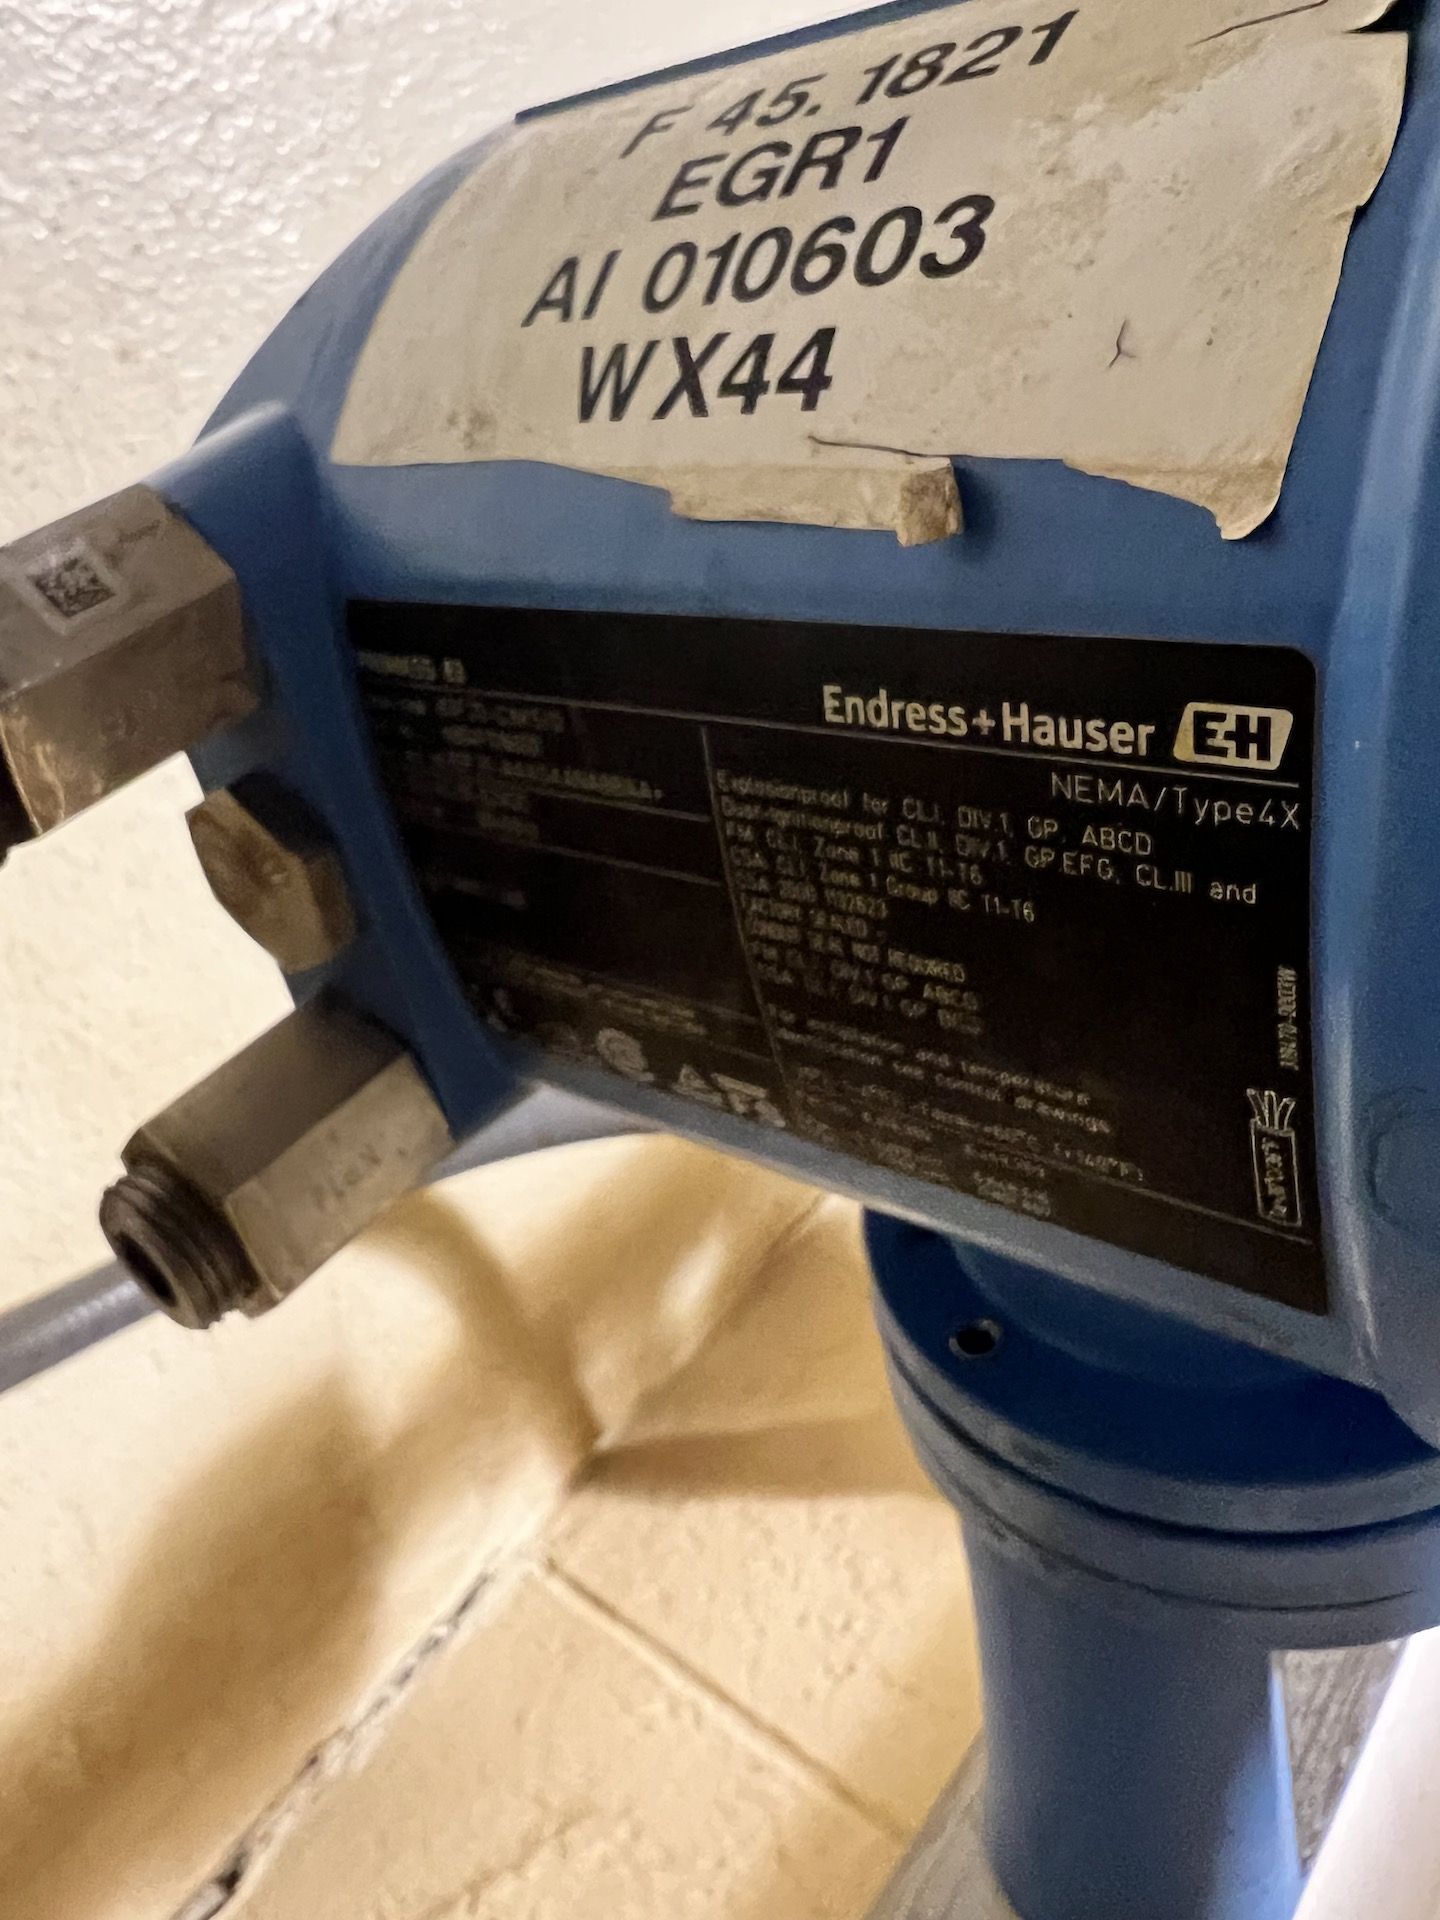 ENDRESS HAUSER PROMASS F FLOW METER WITH DIGITAL READOUT (SIMPLE LOADING FEE $110) - Image 6 of 6